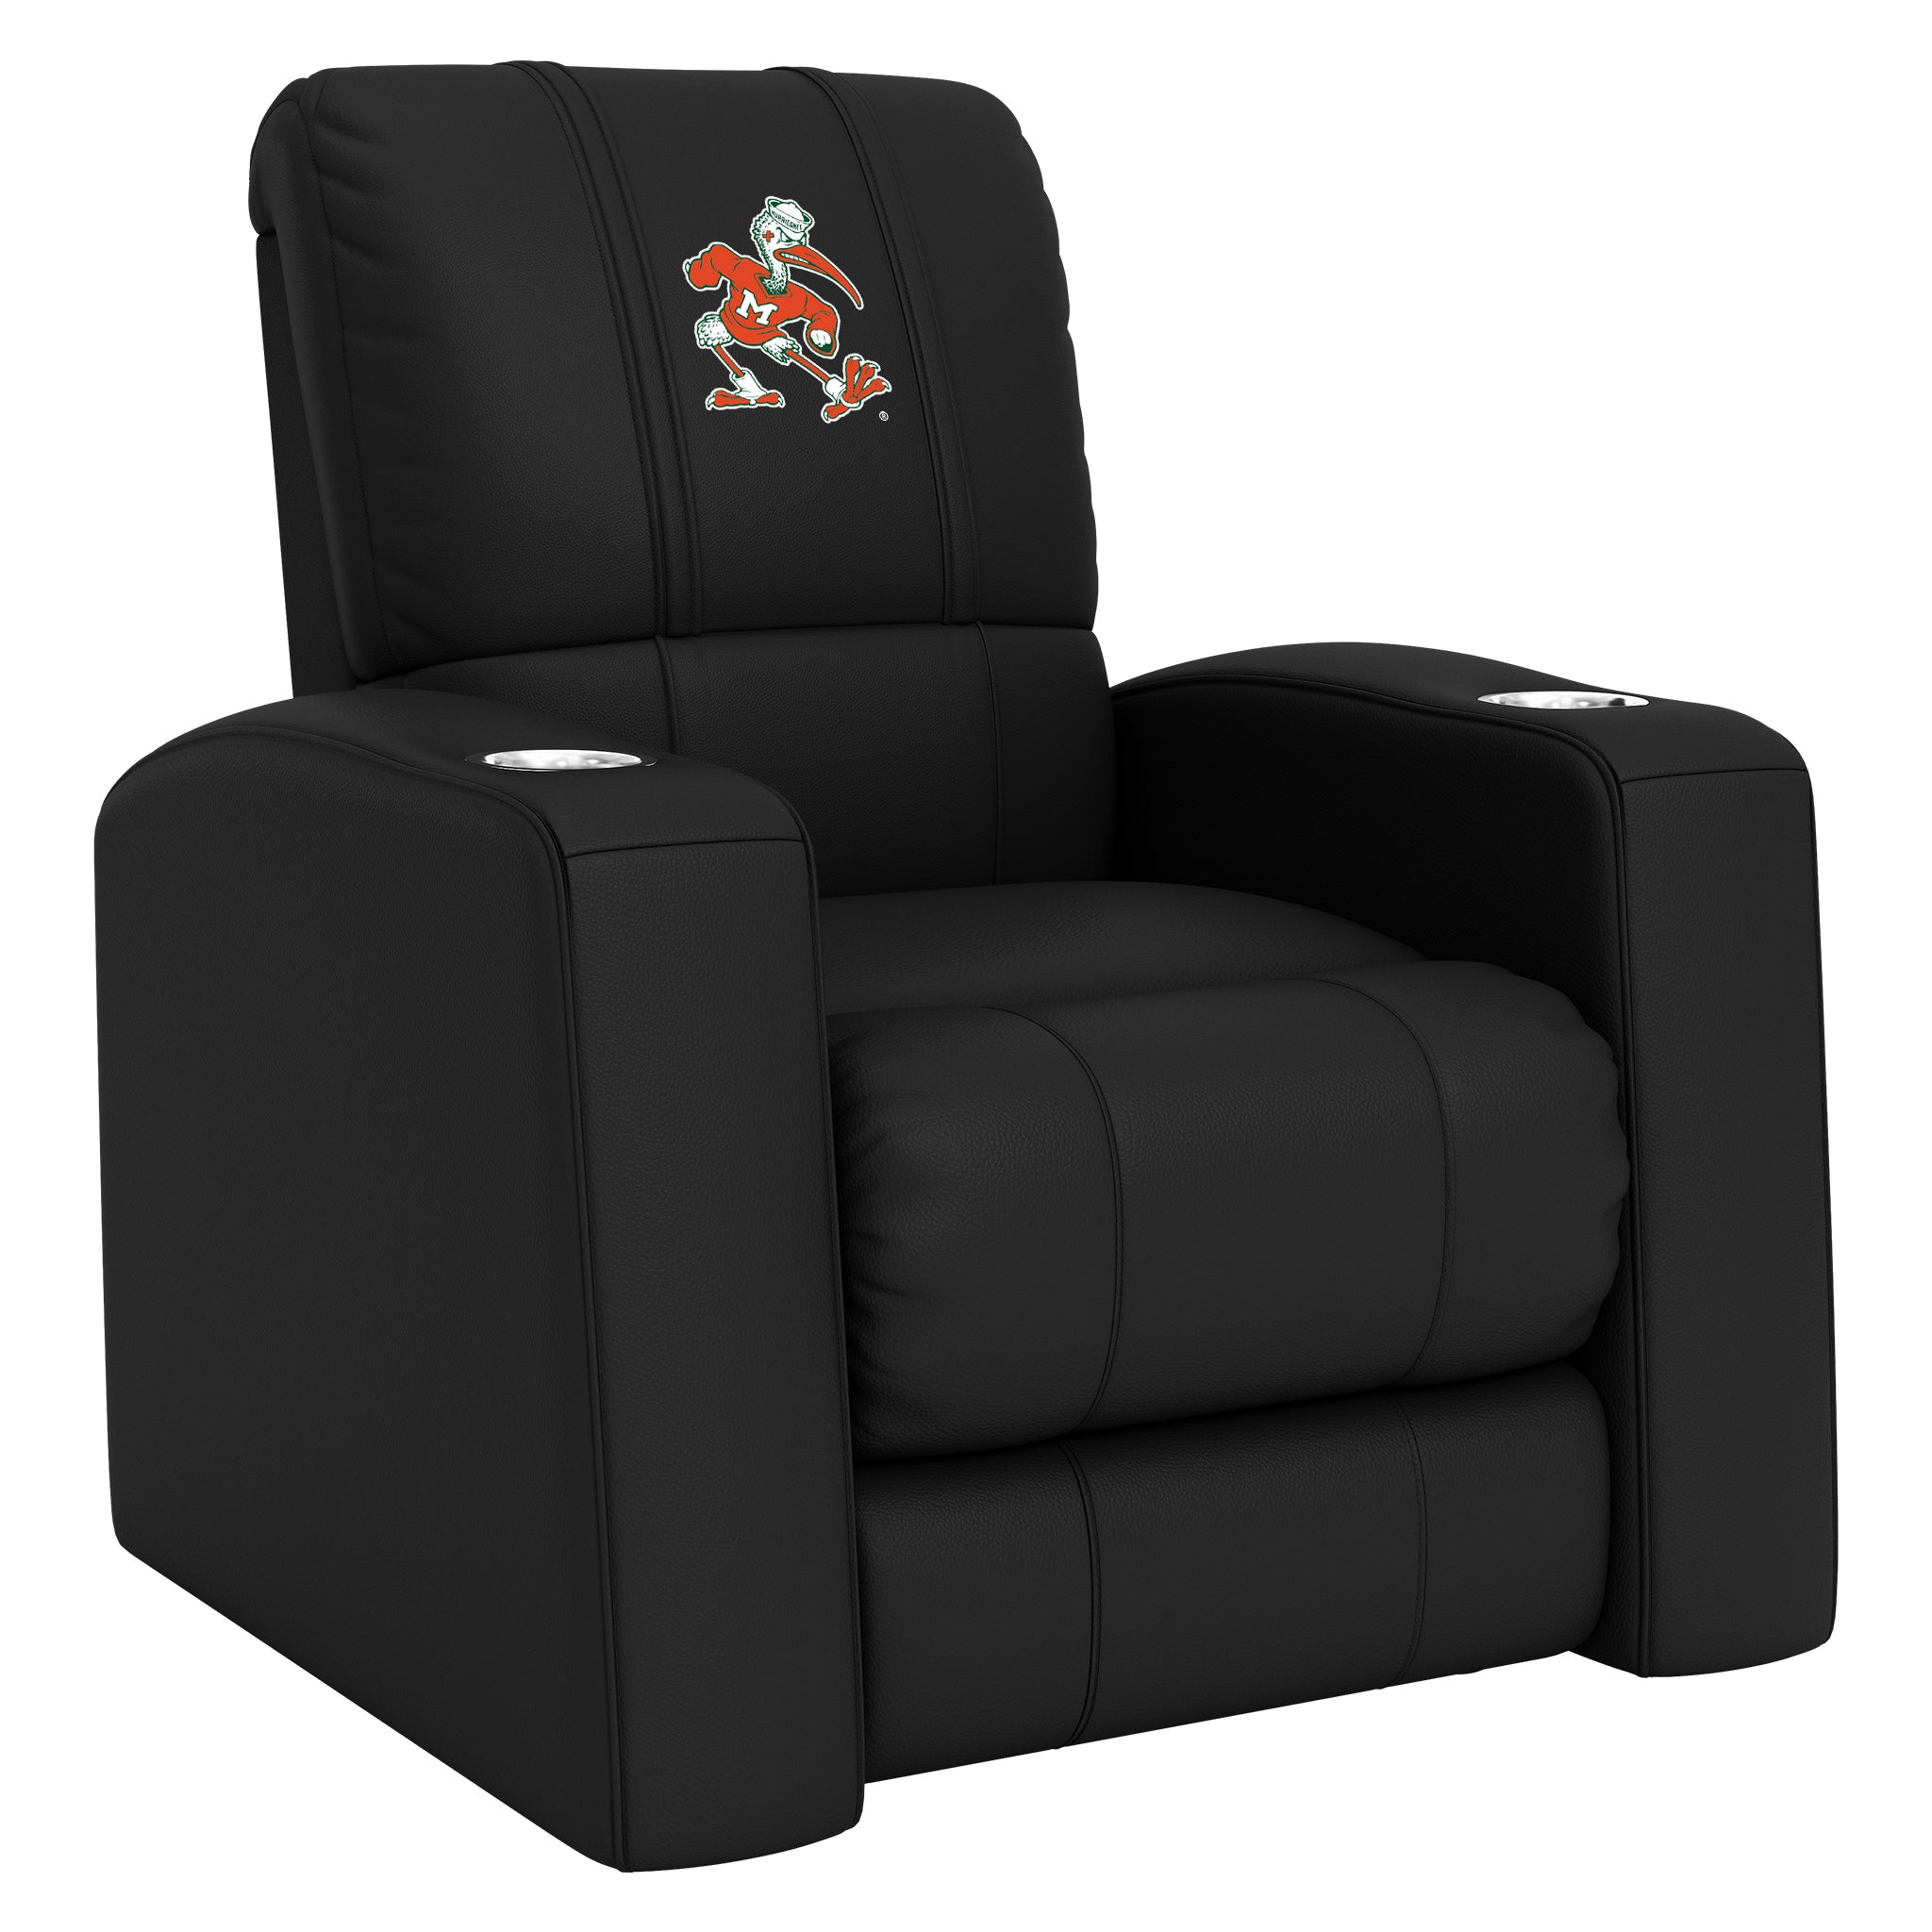 Miami Hurricanes Home Theater Recliner with Miami Hurricanes Secondary Logo